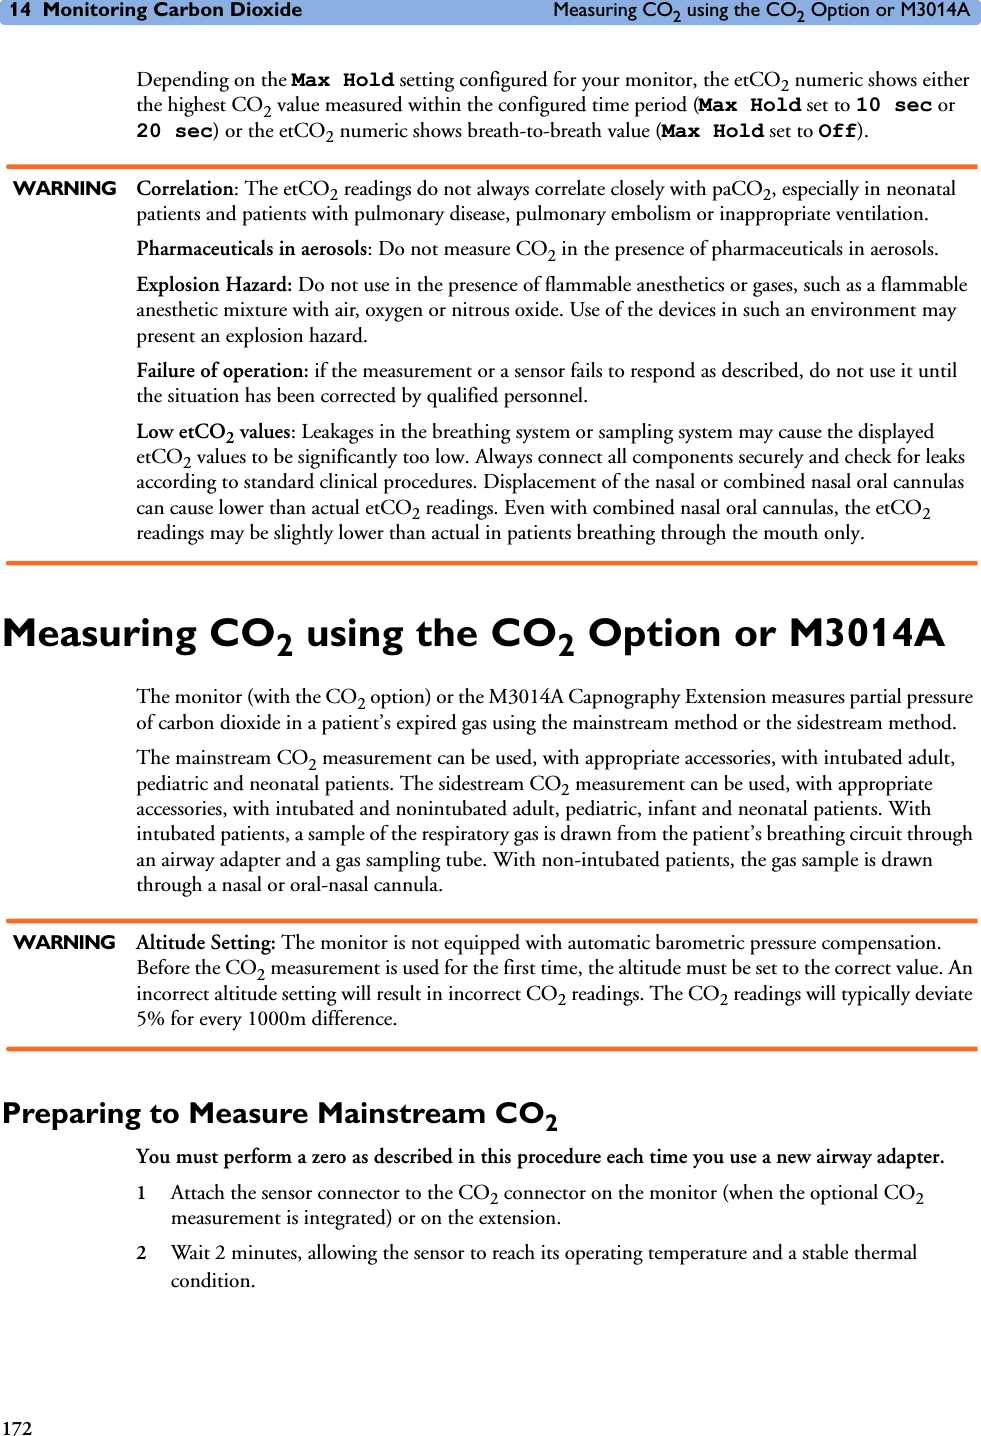 14 Monitoring Carbon Dioxide Measuring CO2 using the CO2 Option or M3014A172Depending on the Max Hold setting configured for your monitor, the etCO2 numeric shows either the highest CO2 value measured within the configured time period (Max Hold set to 10 sec or 20 sec) or the etCO2 numeric shows breath-to-breath value (Max Hold set to Off).WARNING Correlation: The etCO2 readings do not always correlate closely with paCO2, especially in neonatal patients and patients with pulmonary disease, pulmonary embolism or inappropriate ventilation.Pharmaceuticals in aerosols: Do not measure CO2 in the presence of pharmaceuticals in aerosols.Explosion Hazard: Do not use in the presence of flammable anesthetics or gases, such as a flammable anesthetic mixture with air, oxygen or nitrous oxide. Use of the devices in such an environment may present an explosion hazard.Failure of operation: if the measurement or a sensor fails to respond as described, do not use it until the situation has been corrected by qualified personnel.Low etCO2 values: Leakages in the breathing system or sampling system may cause the displayed etCO2 values to be significantly too low. Always connect all components securely and check for leaks according to standard clinical procedures. Displacement of the nasal or combined nasal oral cannulas can cause lower than actual etCO2 readings. Even with combined nasal oral cannulas, the etCO2 readings may be slightly lower than actual in patients breathing through the mouth only.Measuring CO2 using the CO2 Option or M3014AThe monitor (with the CO2 option) or the M3014A Capnography Extension measures partial pressure of carbon dioxide in a patient’s expired gas using the mainstream method or the sidestream method. The mainstream CO2 measurement can be used, with appropriate accessories, with intubated adult, pediatric and neonatal patients. The sidestream CO2 measurement can be used, with appropriate accessories, with intubated and nonintubated adult, pediatric, infant and neonatal patients. With intubated patients, a sample of the respiratory gas is drawn from the patient’s breathing circuit through an airway adapter and a gas sampling tube. With non-intubated patients, the gas sample is drawn through a nasal or oral-nasal cannula.WARNING Altitude Setting: The monitor is not equipped with automatic barometric pressure compensation. Before the CO2 measurement is used for the first time, the altitude must be set to the correct value. An incorrect altitude setting will result in incorrect CO2 readings. The CO2 readings will typically deviate 5% for every 1000m difference.Preparing to Measure Mainstream CO2You must perform a zero as described in this procedure each time you use a new airway adapter.1Attach the sensor connector to the CO2 connector on the monitor (when the optional CO2 measurement is integrated) or on the extension.2Wait 2 minutes, allowing the sensor to reach its operating temperature and a stable thermal condition.